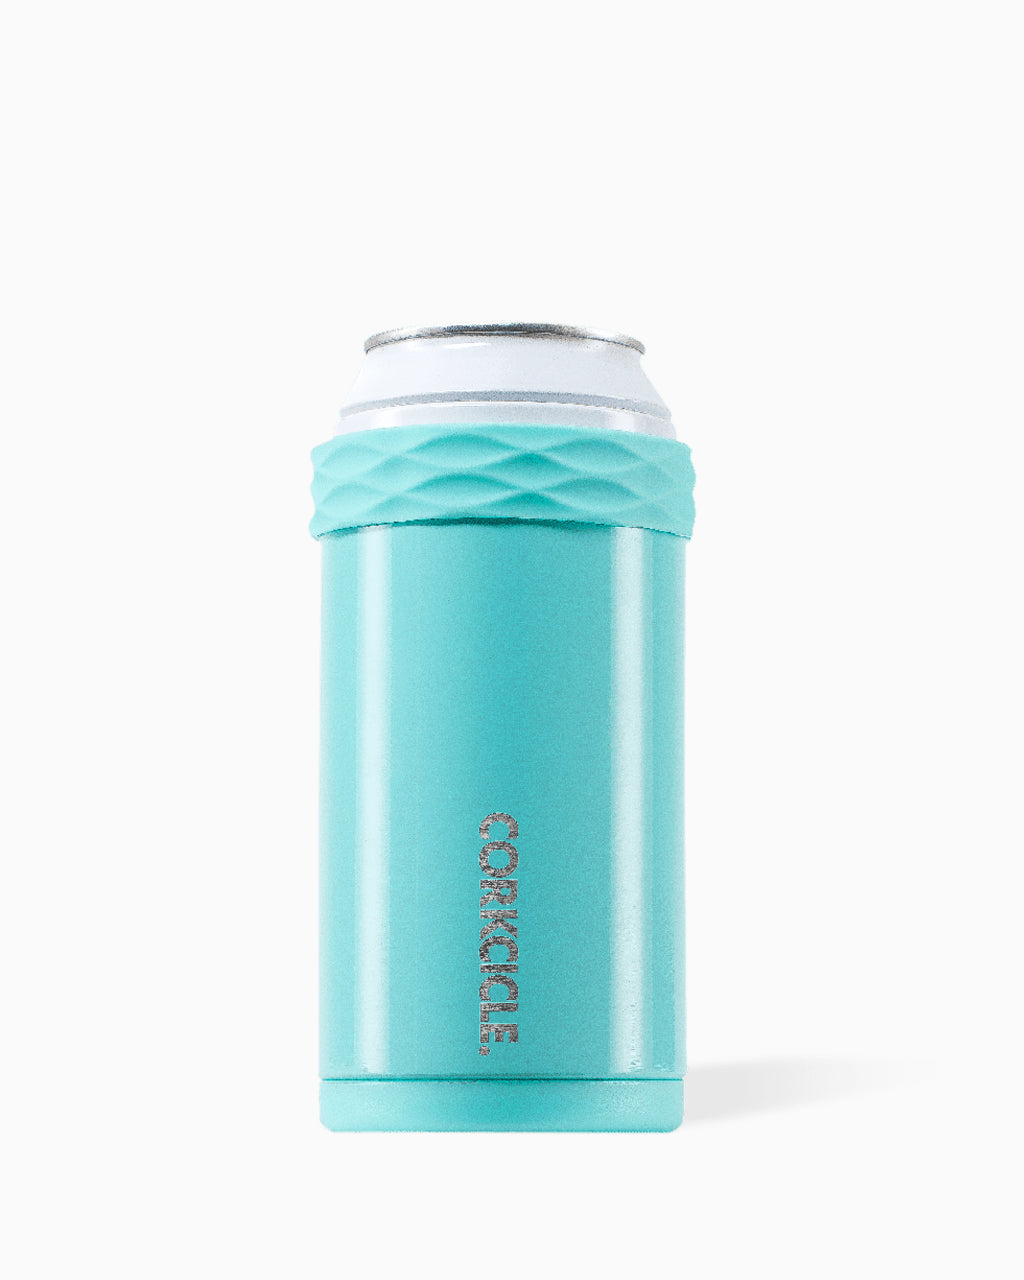 Corkcicle Can Cooler - Powder Blue